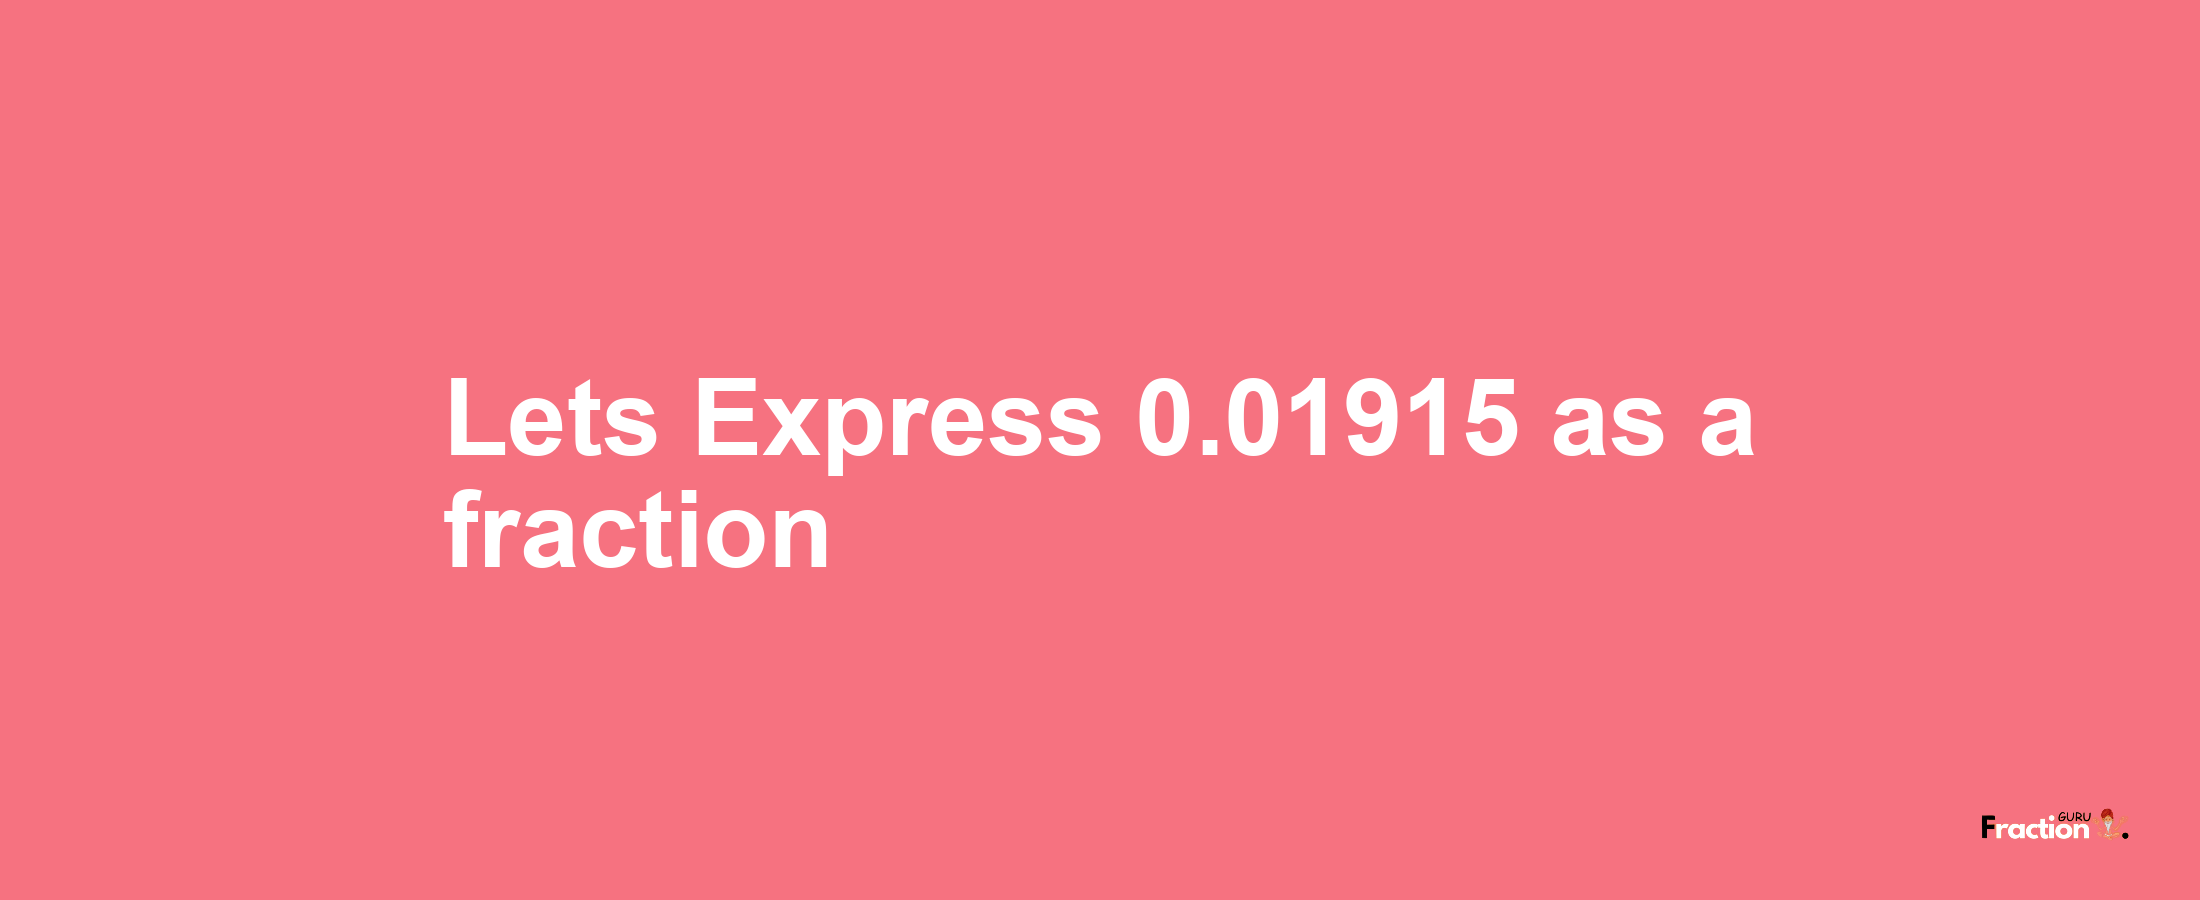 Lets Express 0.01915 as afraction